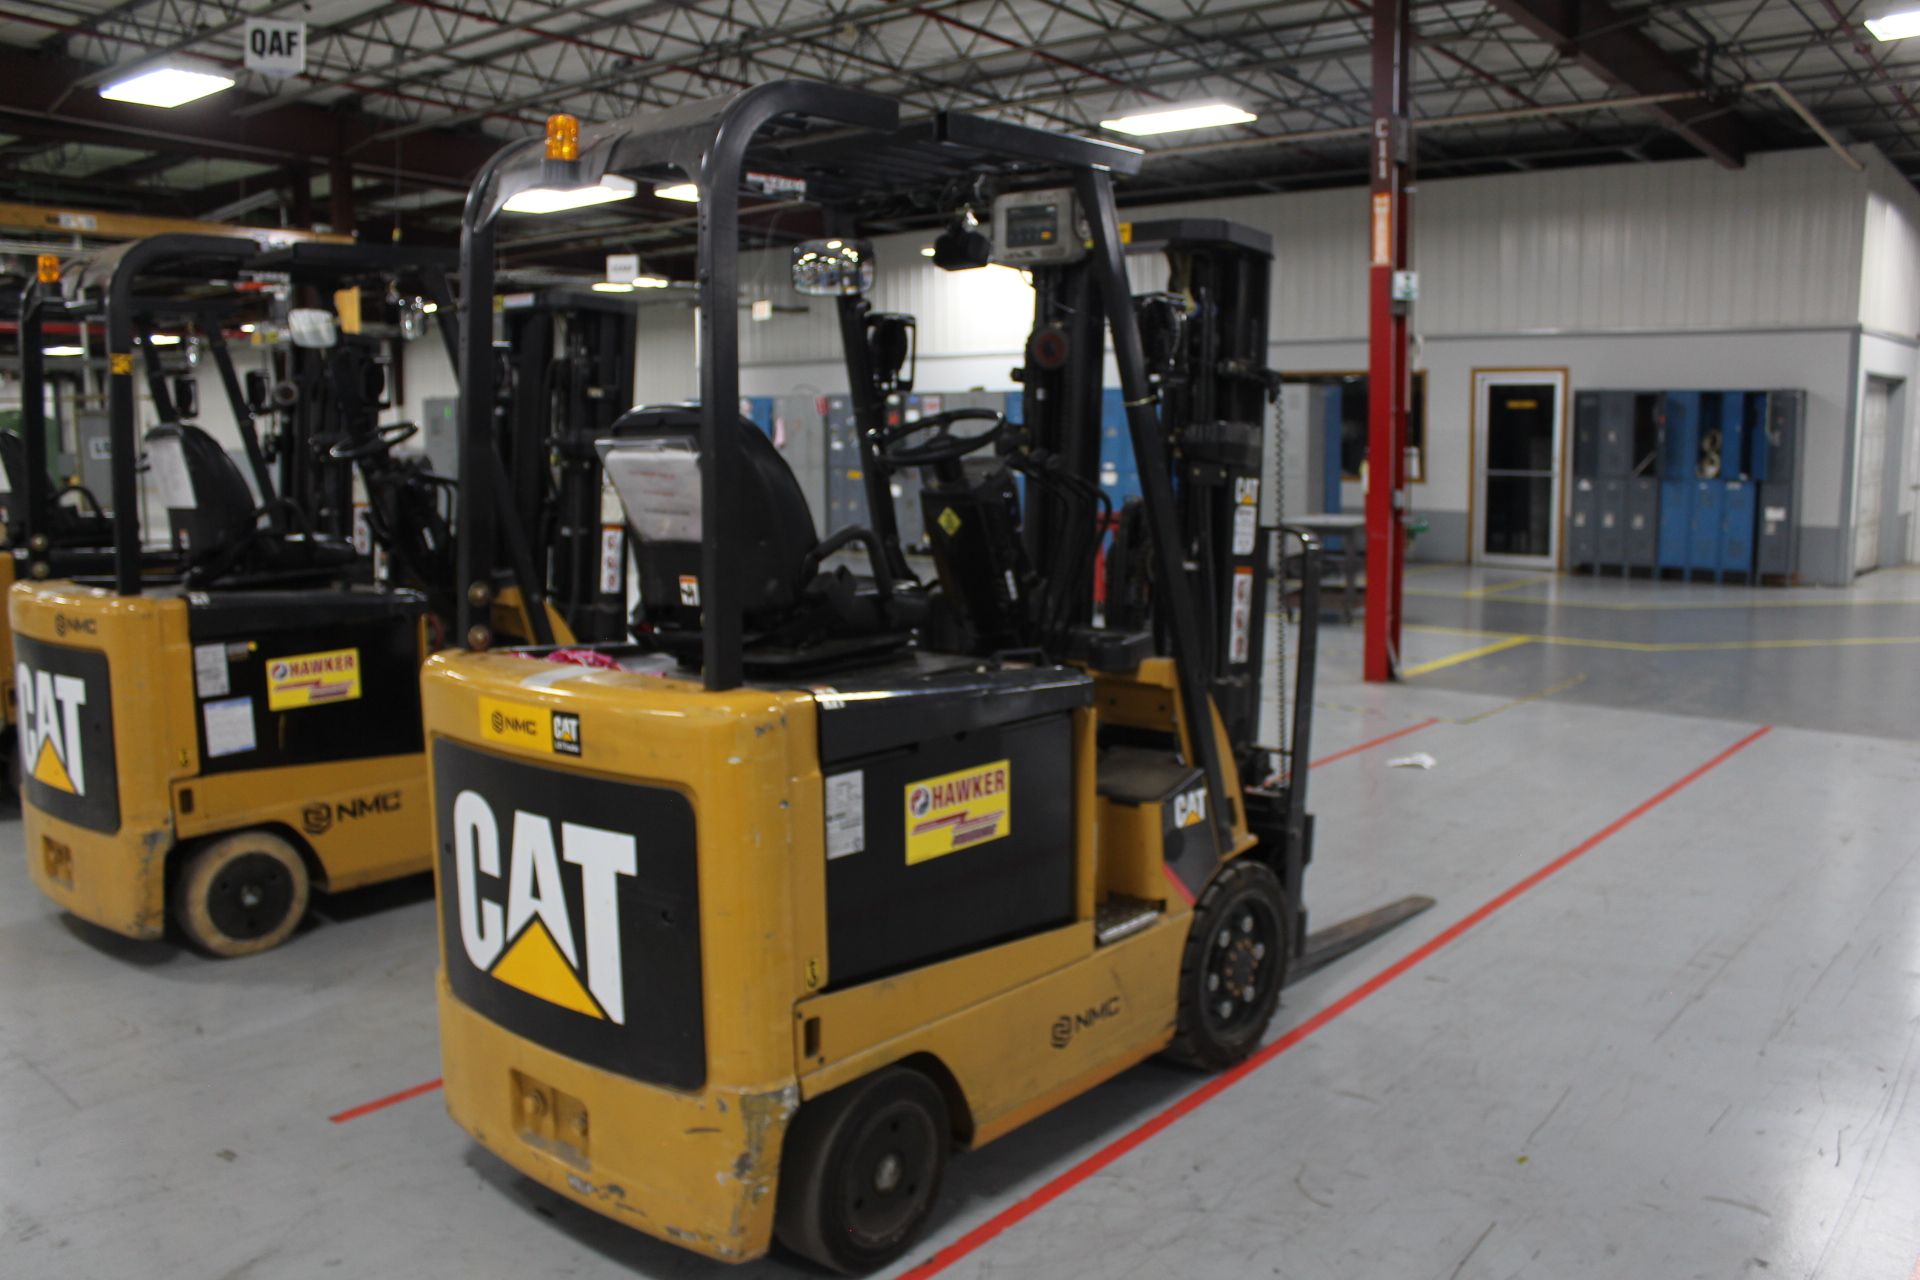 Caterpillar Model E5000-AC 4,450 Lb. Capacity Electric Forklift, S/N A4EC240780, Sit-Down Rider, - Image 3 of 4